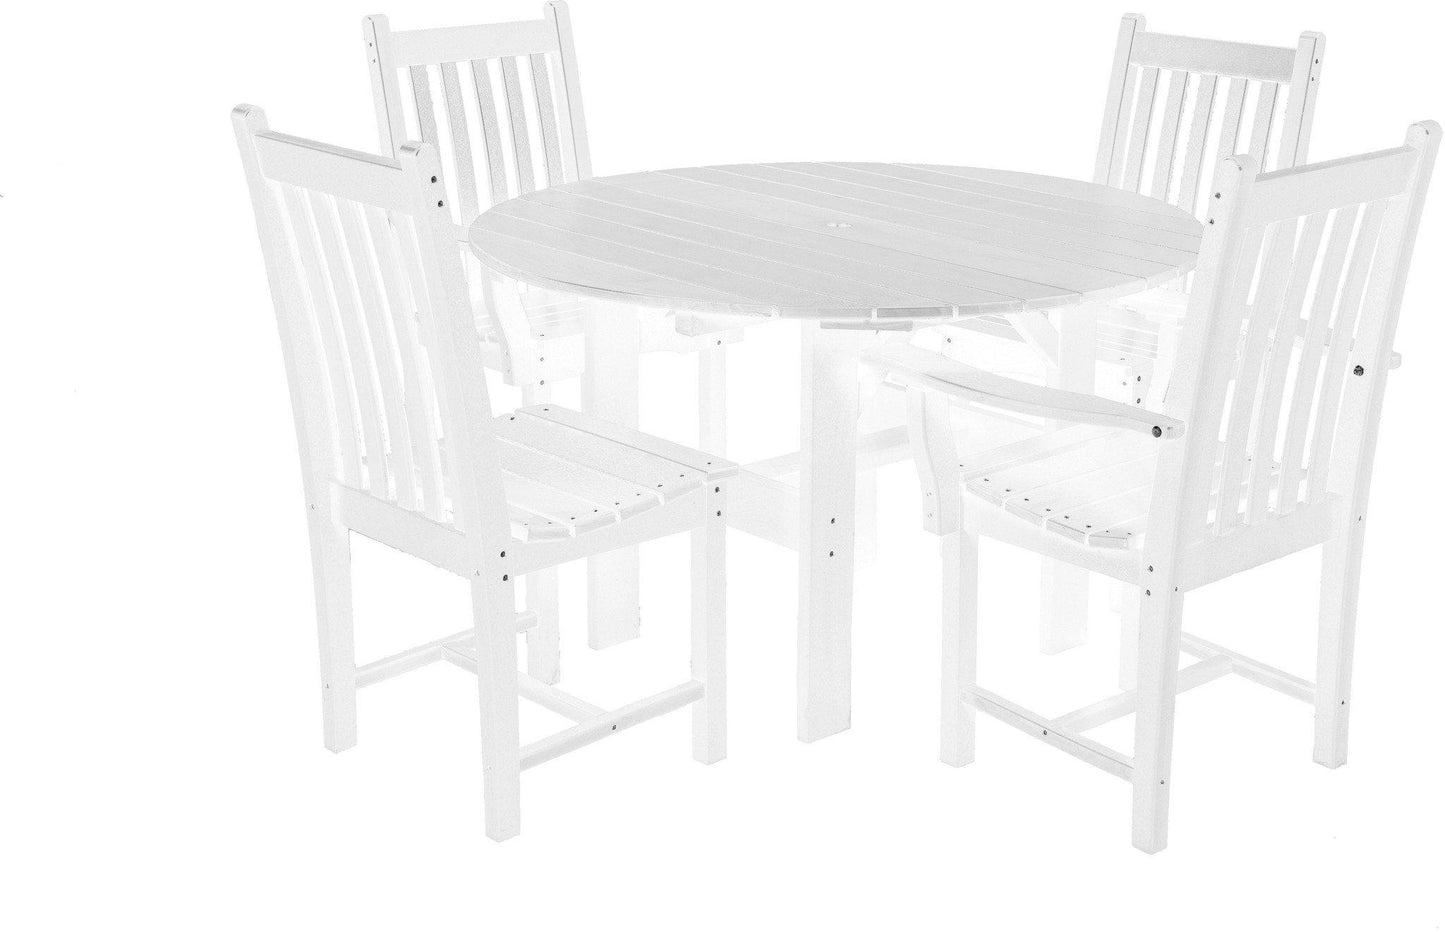 Wildridge Outdoor Recycled Plastic Classic 6 Piece Round Patio Dining Set - LEAD TIME TO SHIP 3 WEEKS